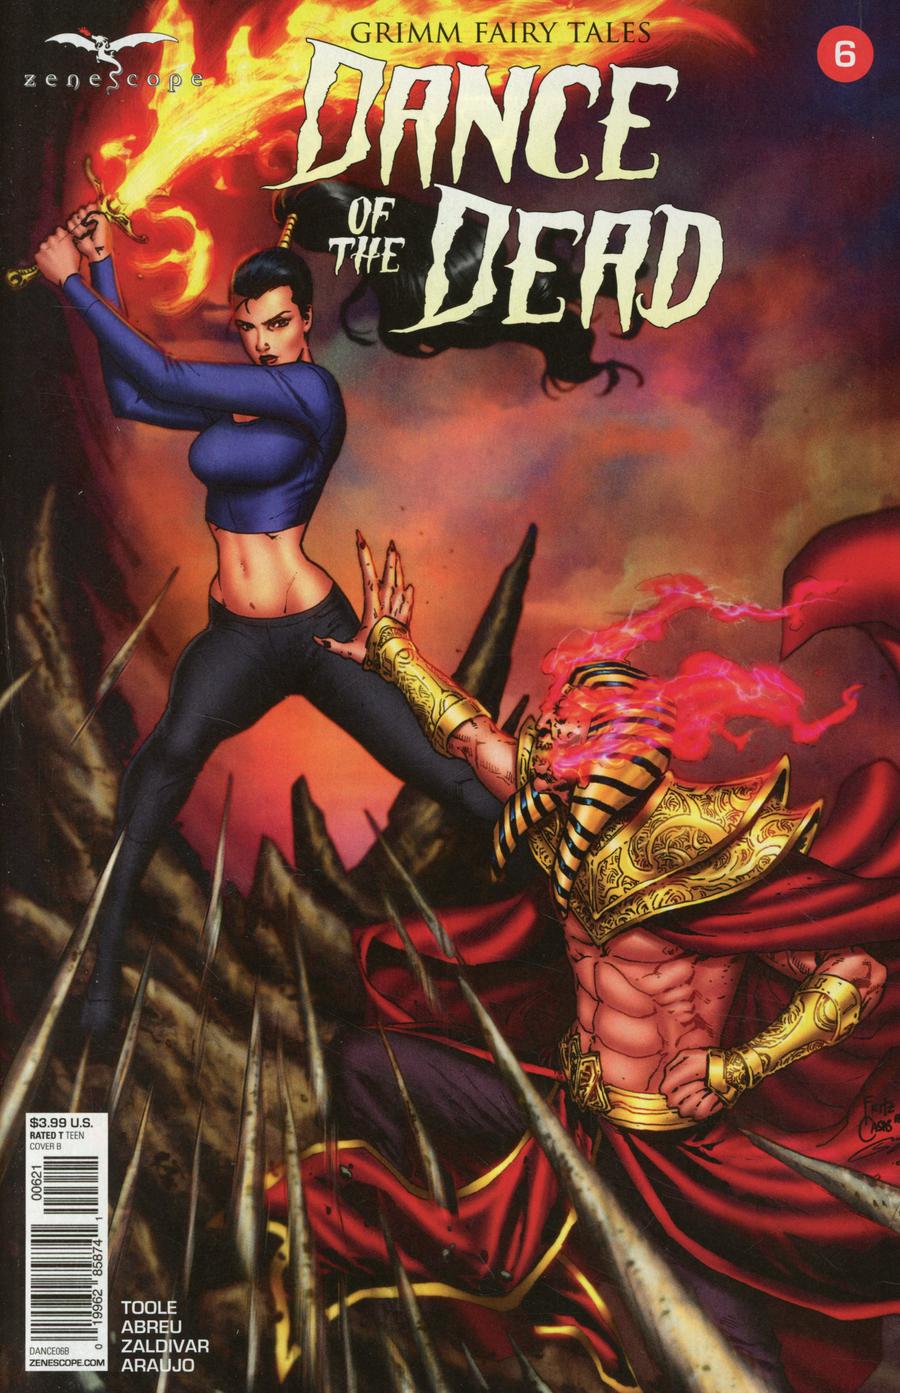 Grimm Fairy Tales Presents Dance Of The Dead #6 Cover B Fritz Casas